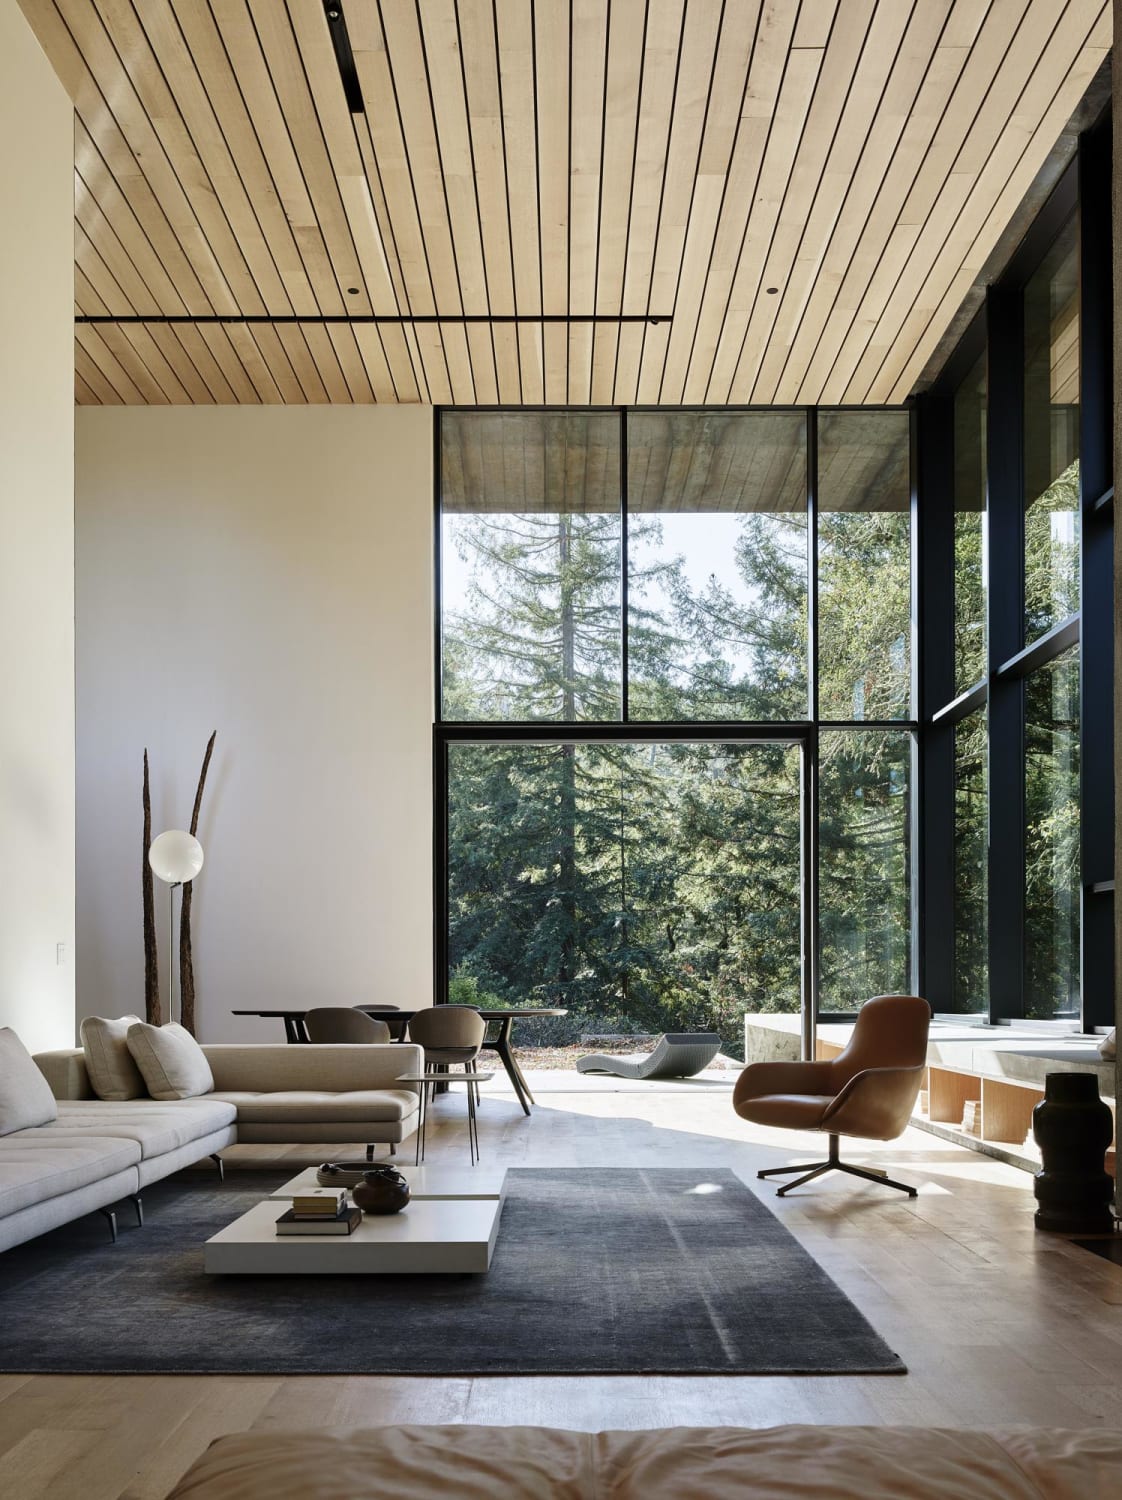 Double-height living area surrounded by oak trees in a sustainable house with net-zero energy performance, Orinda, California by Faulkner Architects (Photo: Joe Fletcher)